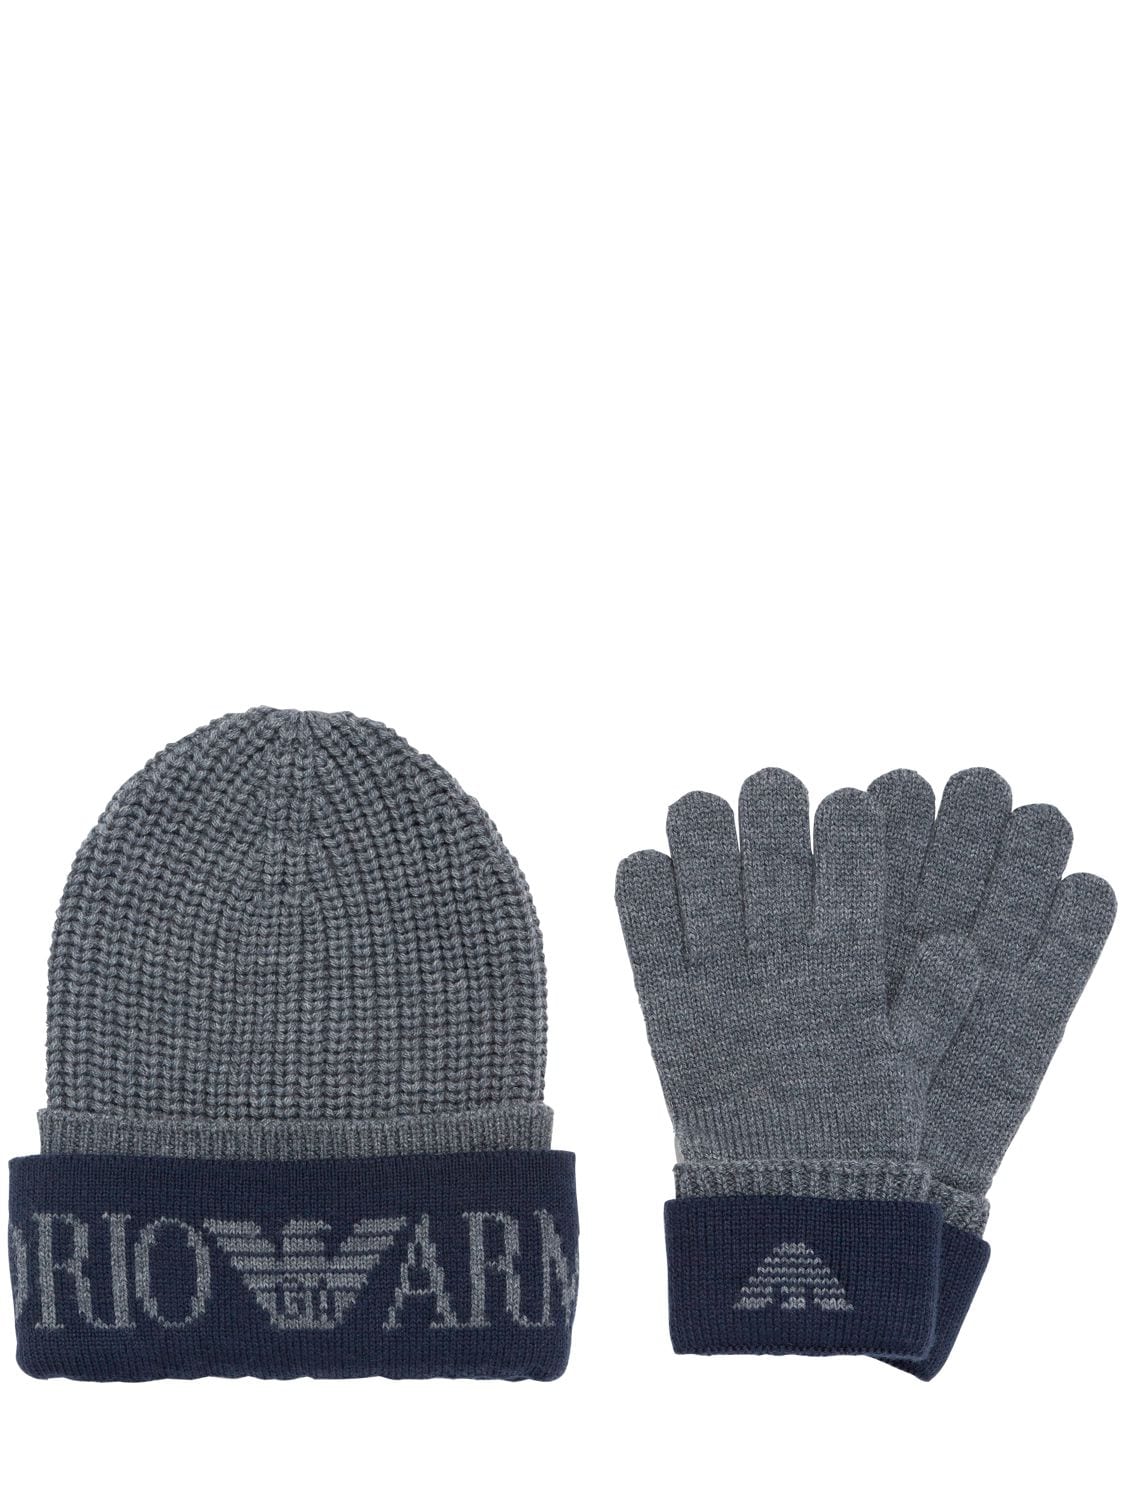 Image of Wool Blend Knit Beanie & Gloves